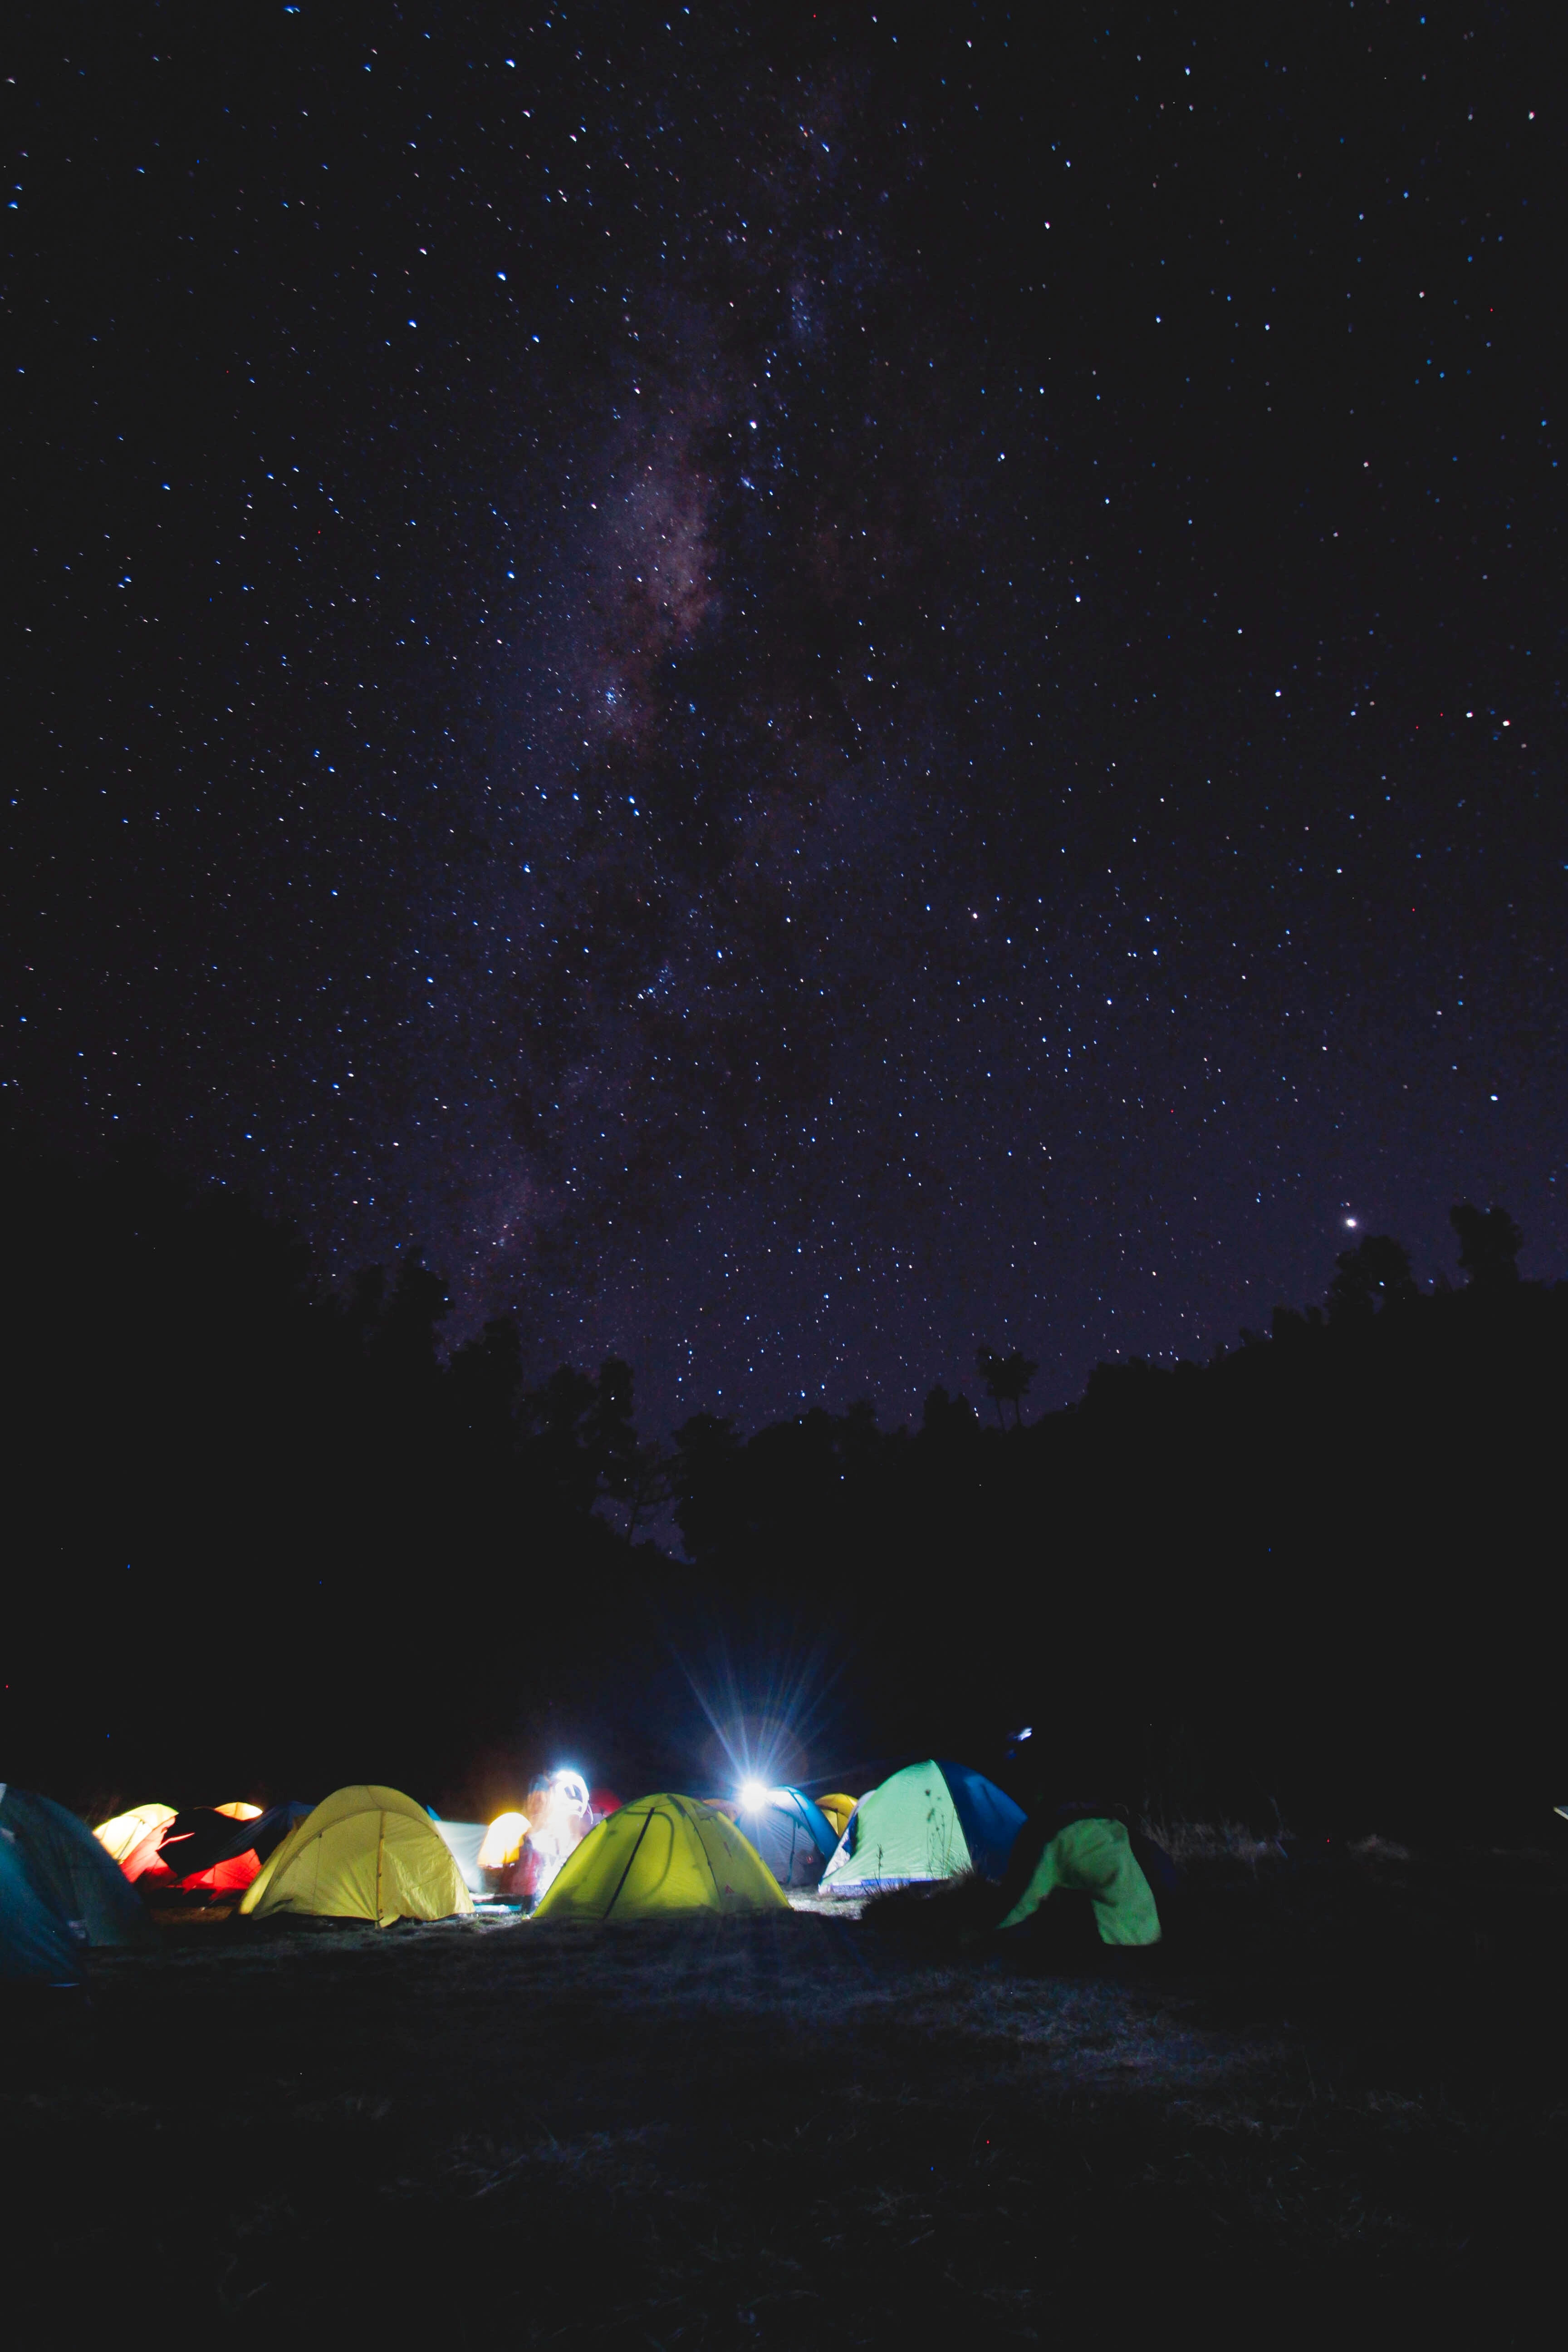 campsite, nature, night, starry sky, tent, camping, tents